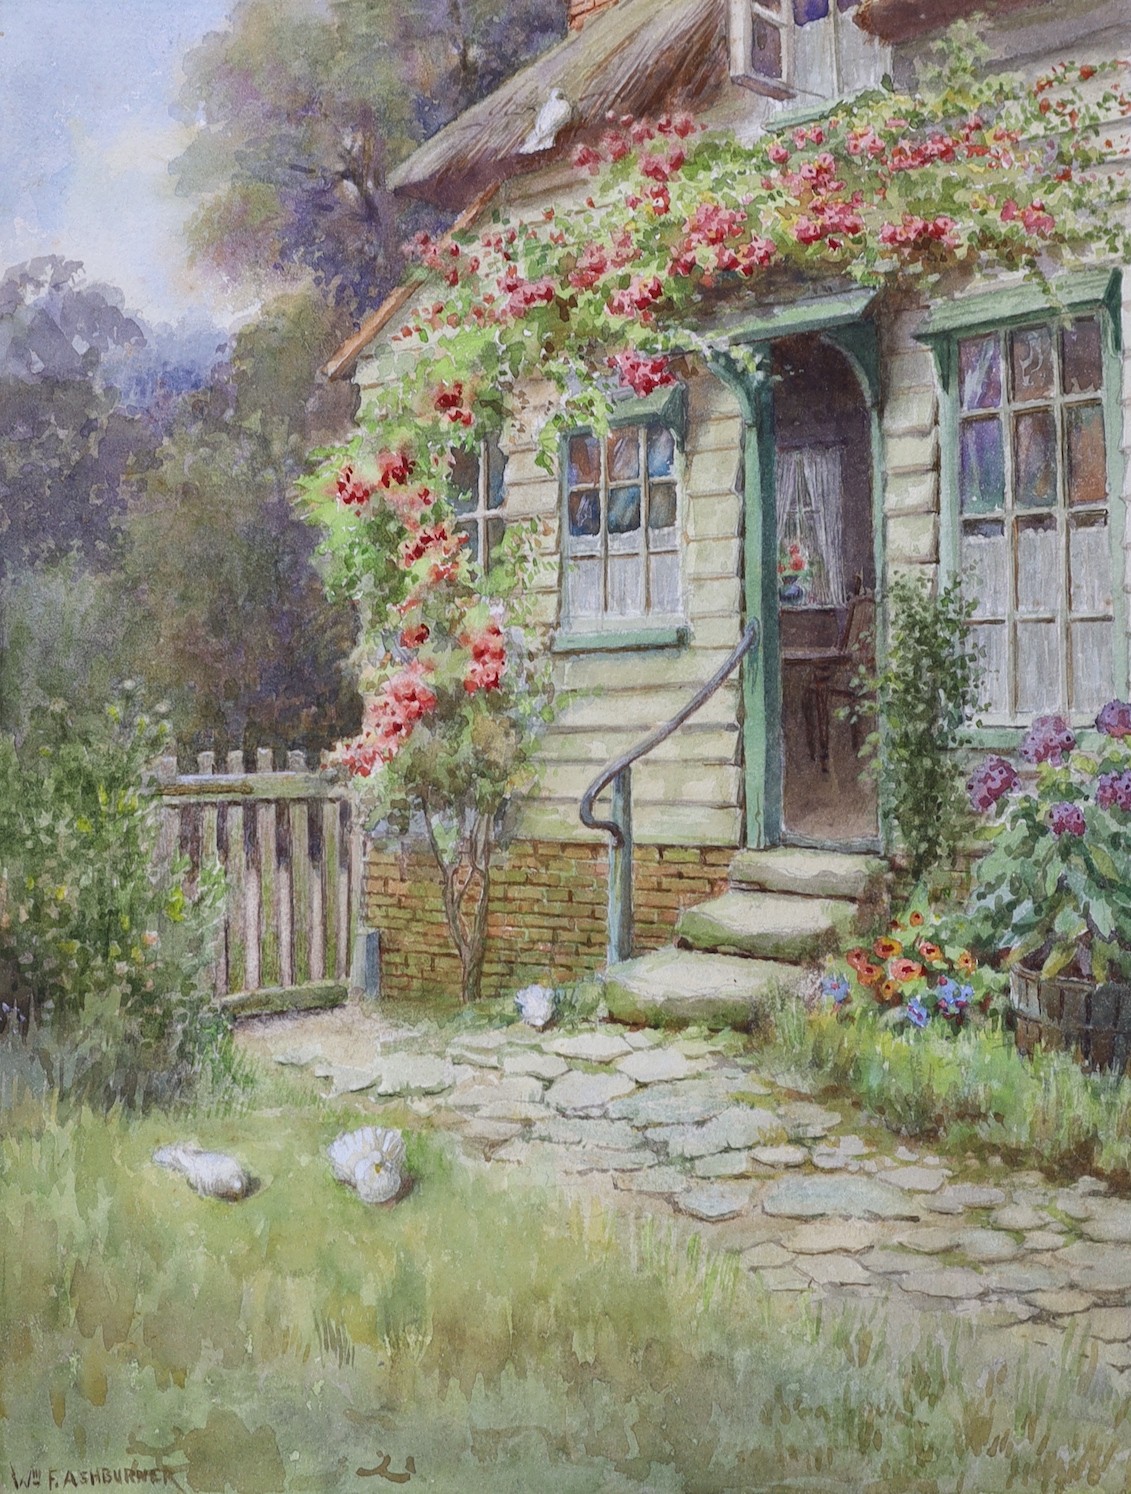 William Ashburner (active 1900-1932), three watercolours, Cottage Gardens, signed, unframed, largest 38 x 30cm